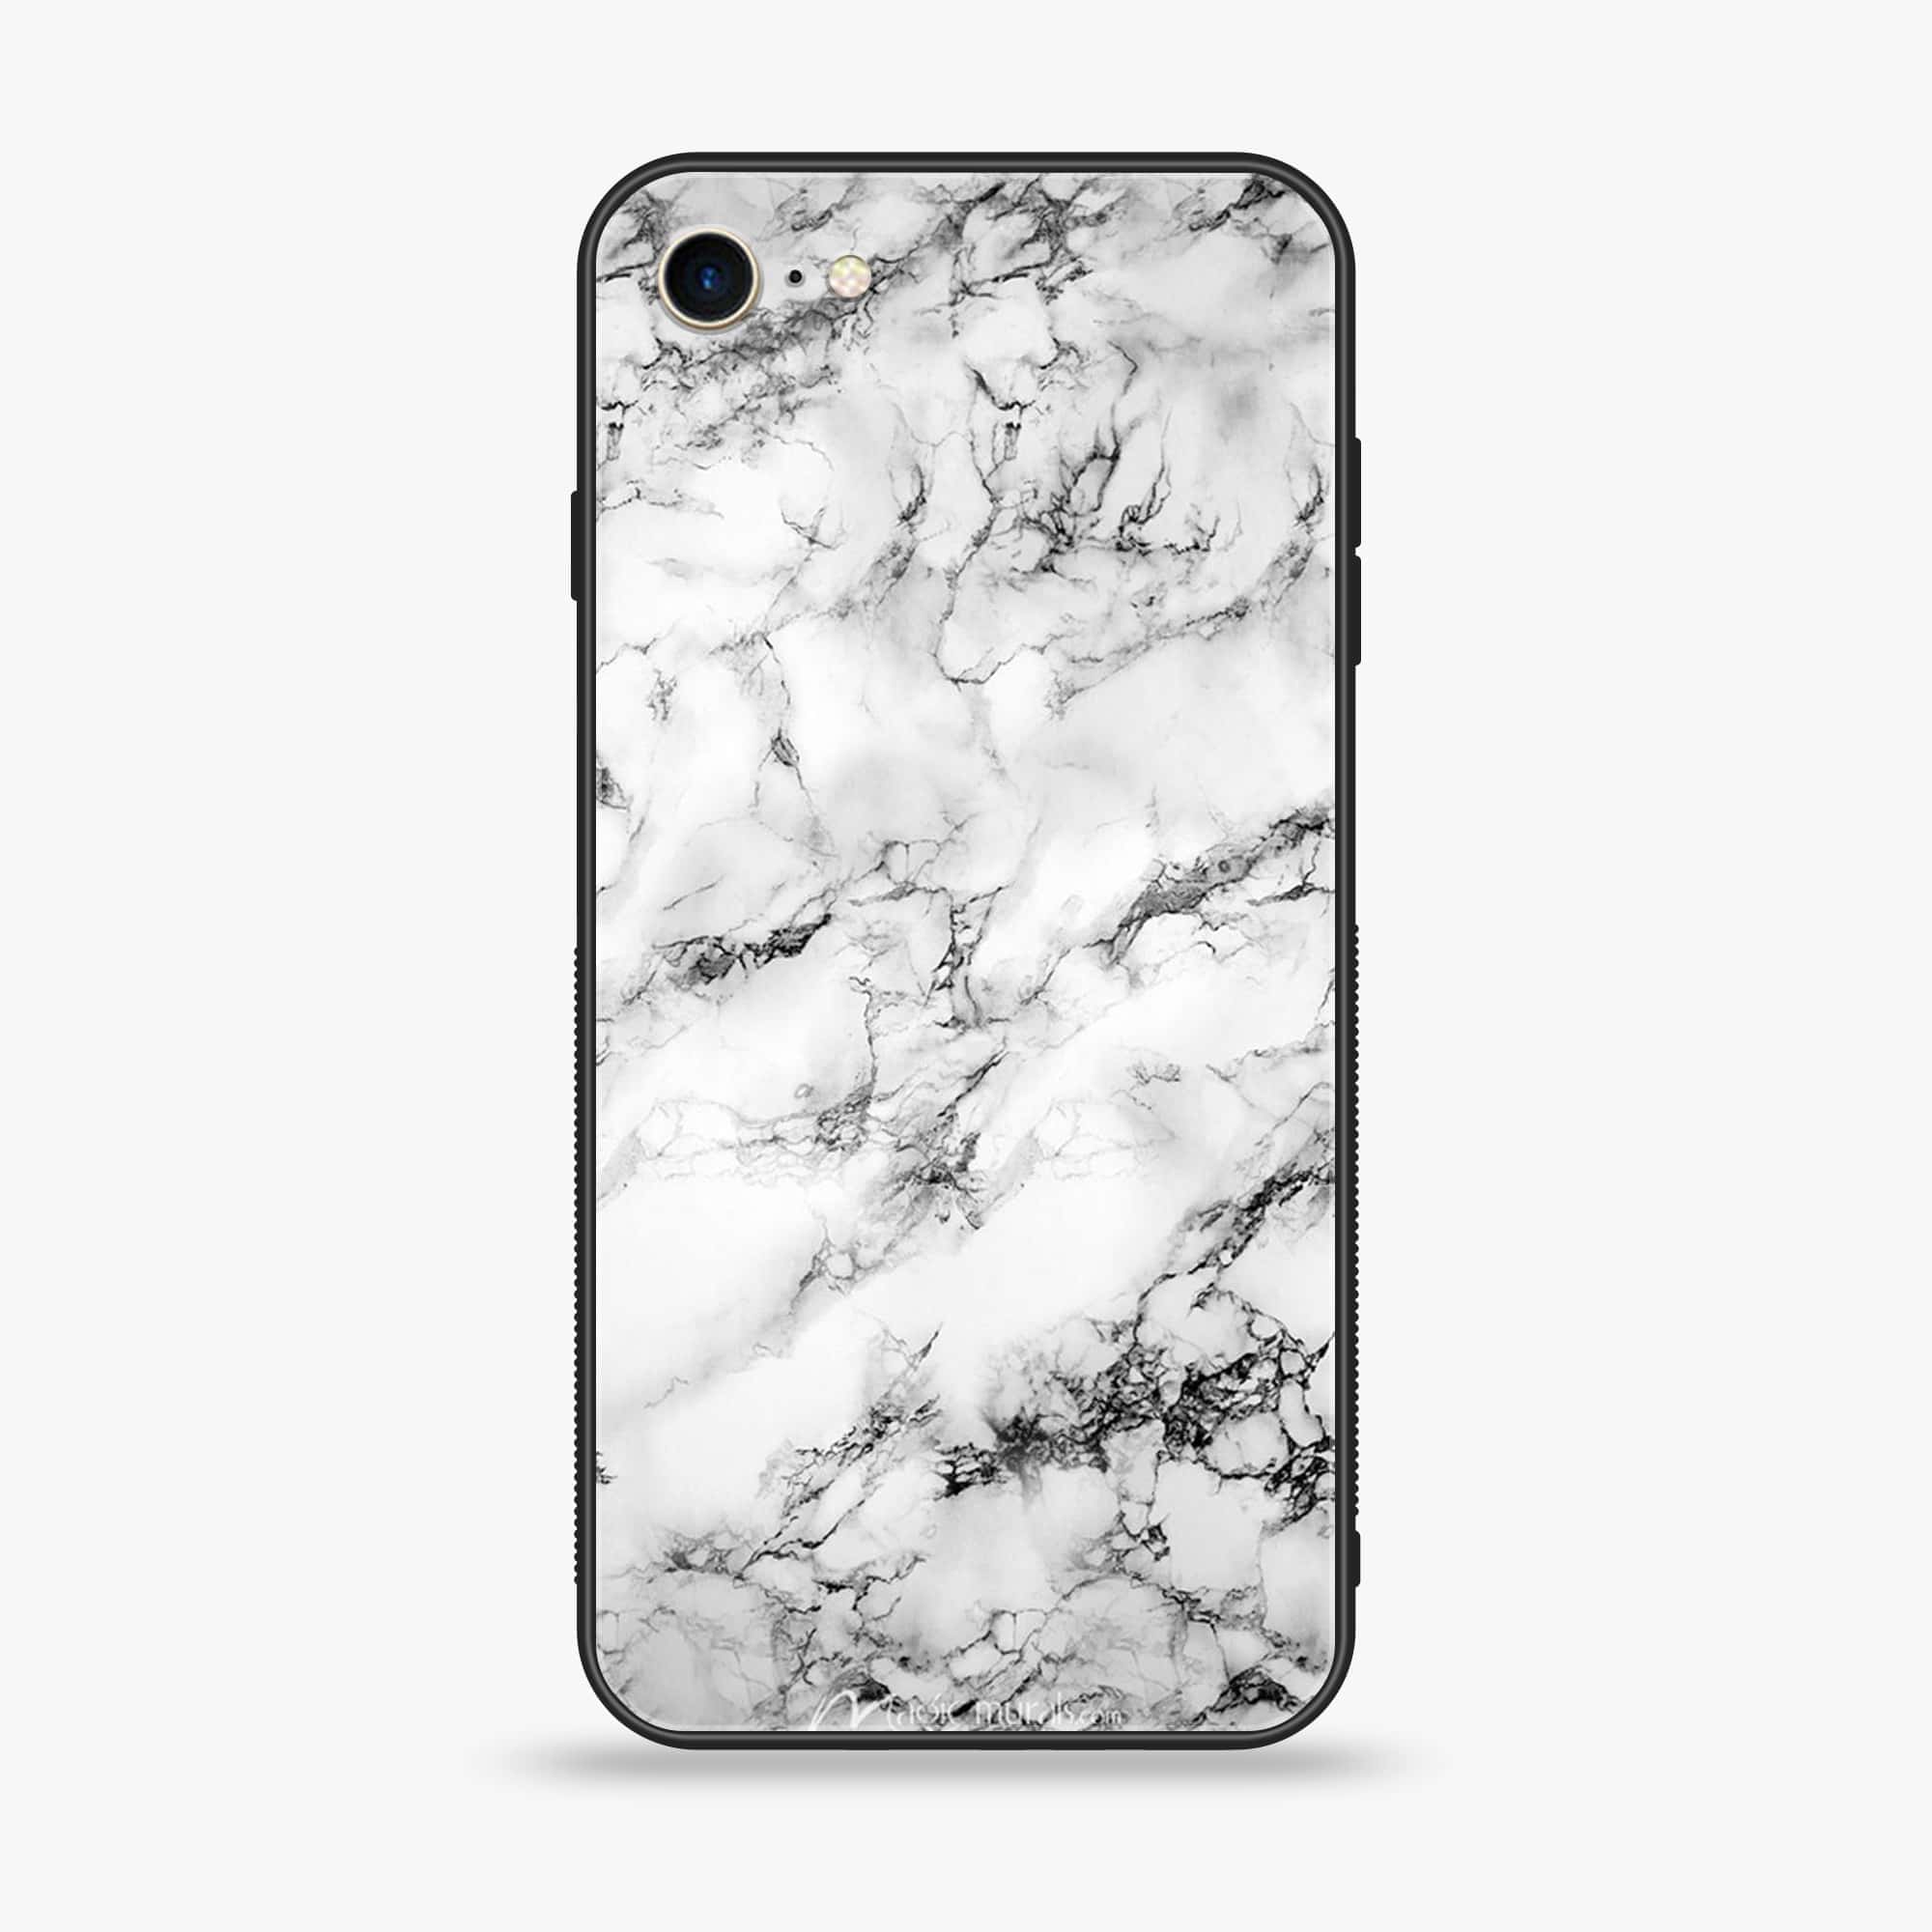 iPhone SE 2020- White Marble Series - Premium Printed Glass soft Bumper shock Proof Case